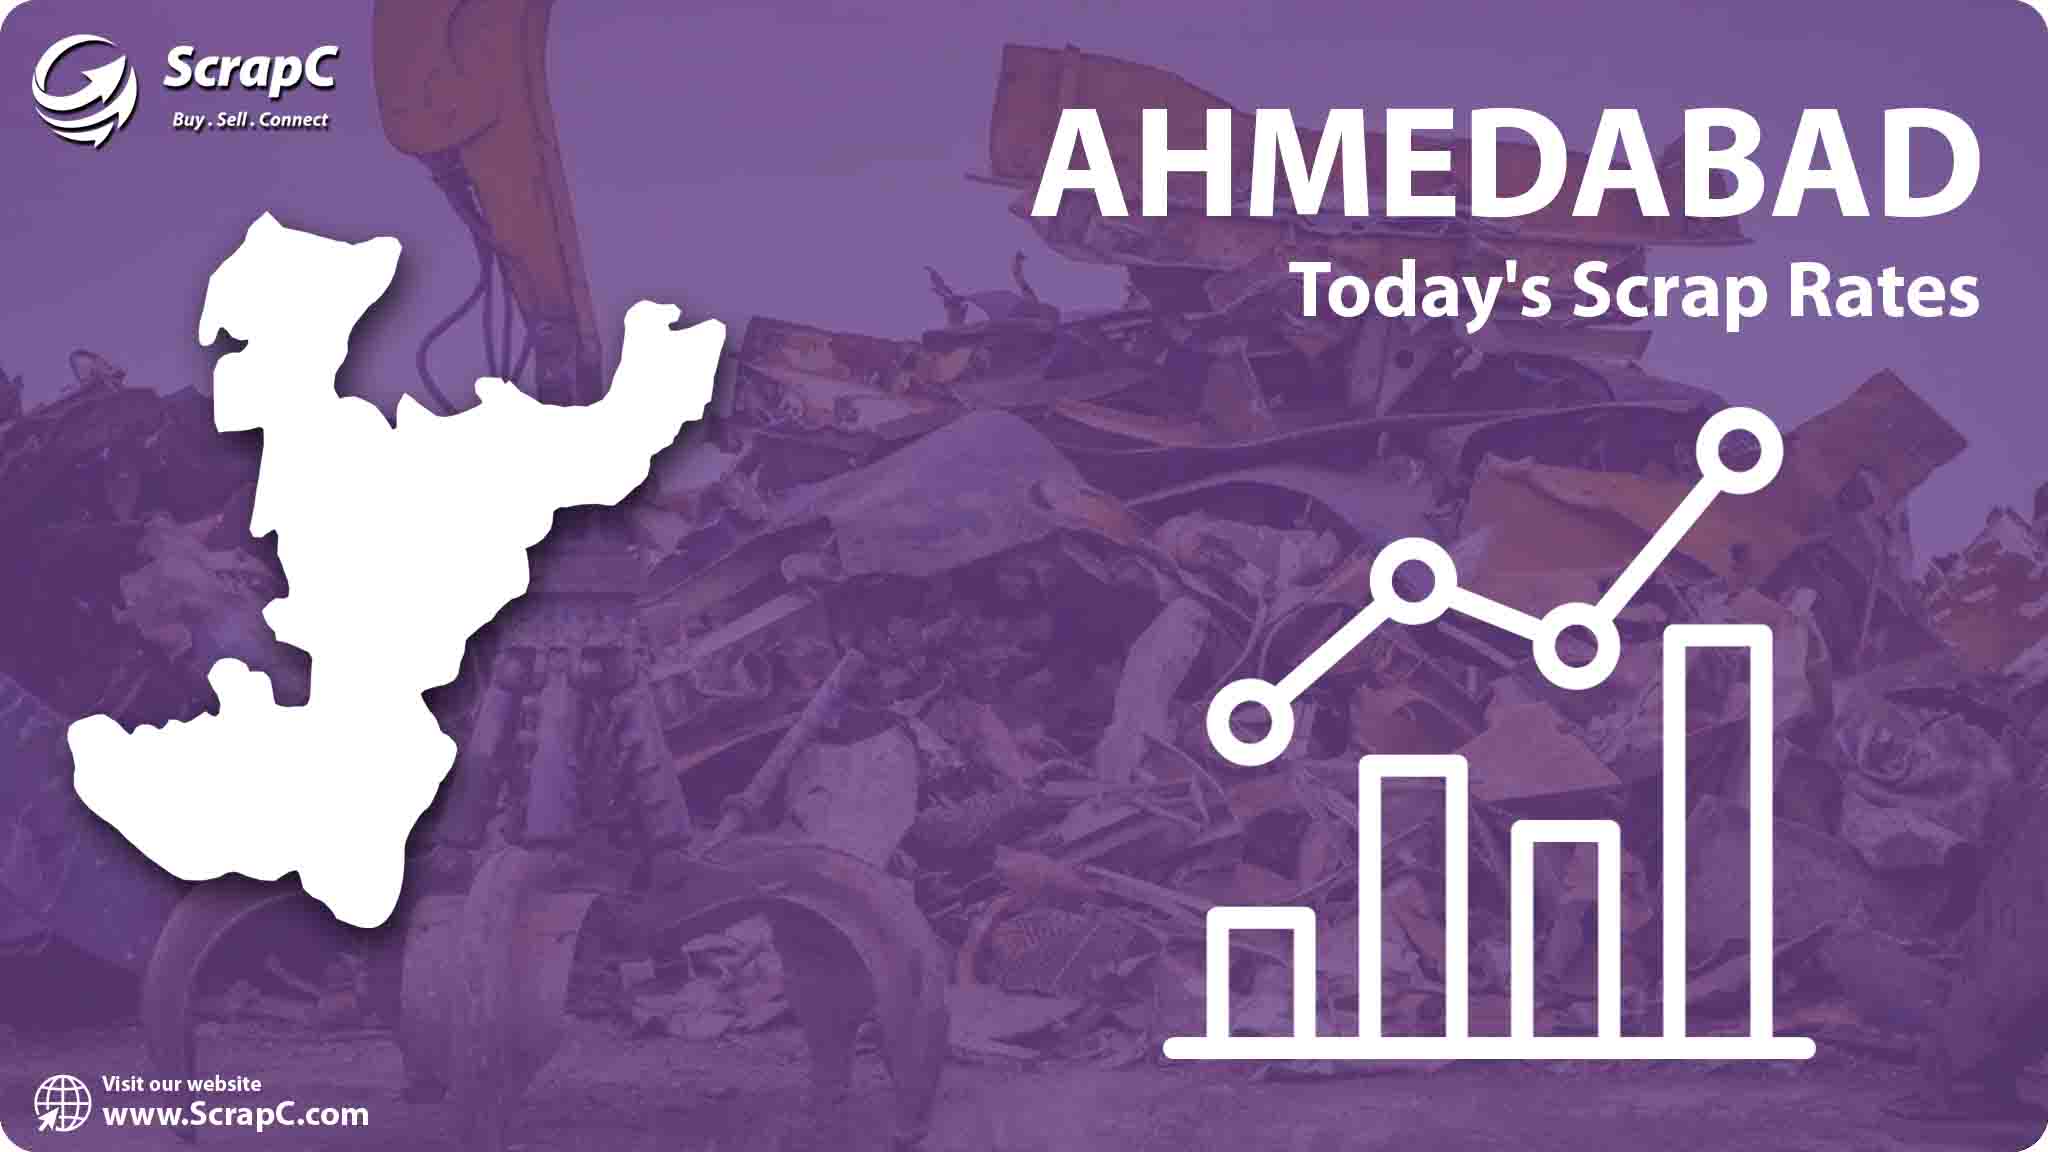 Today's Scrap Rates in Ahmedabad